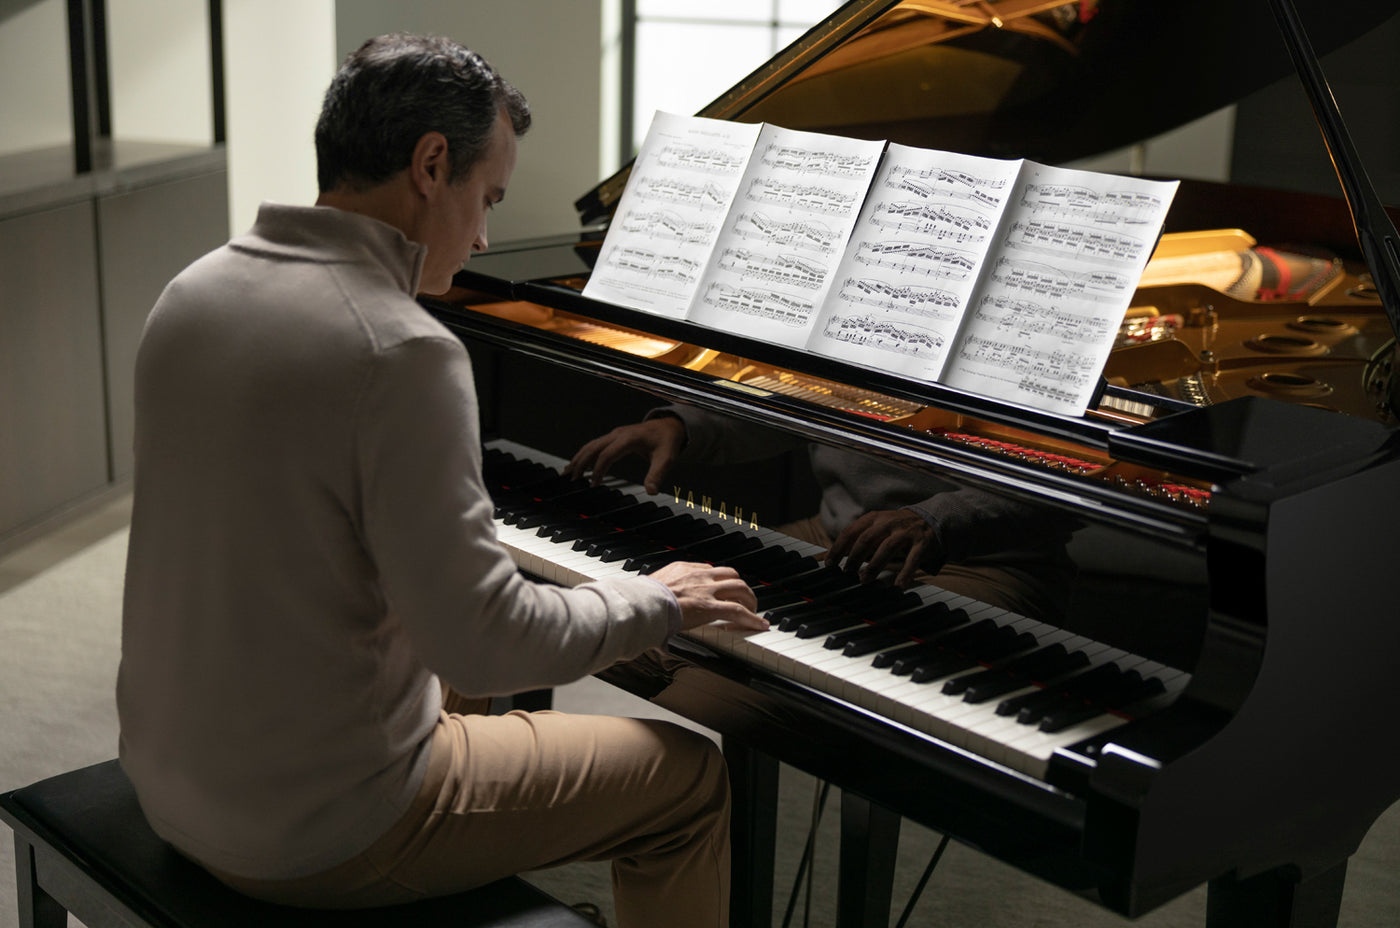 Pianist practicing on a black grand piano with sheet music open on the music rest.